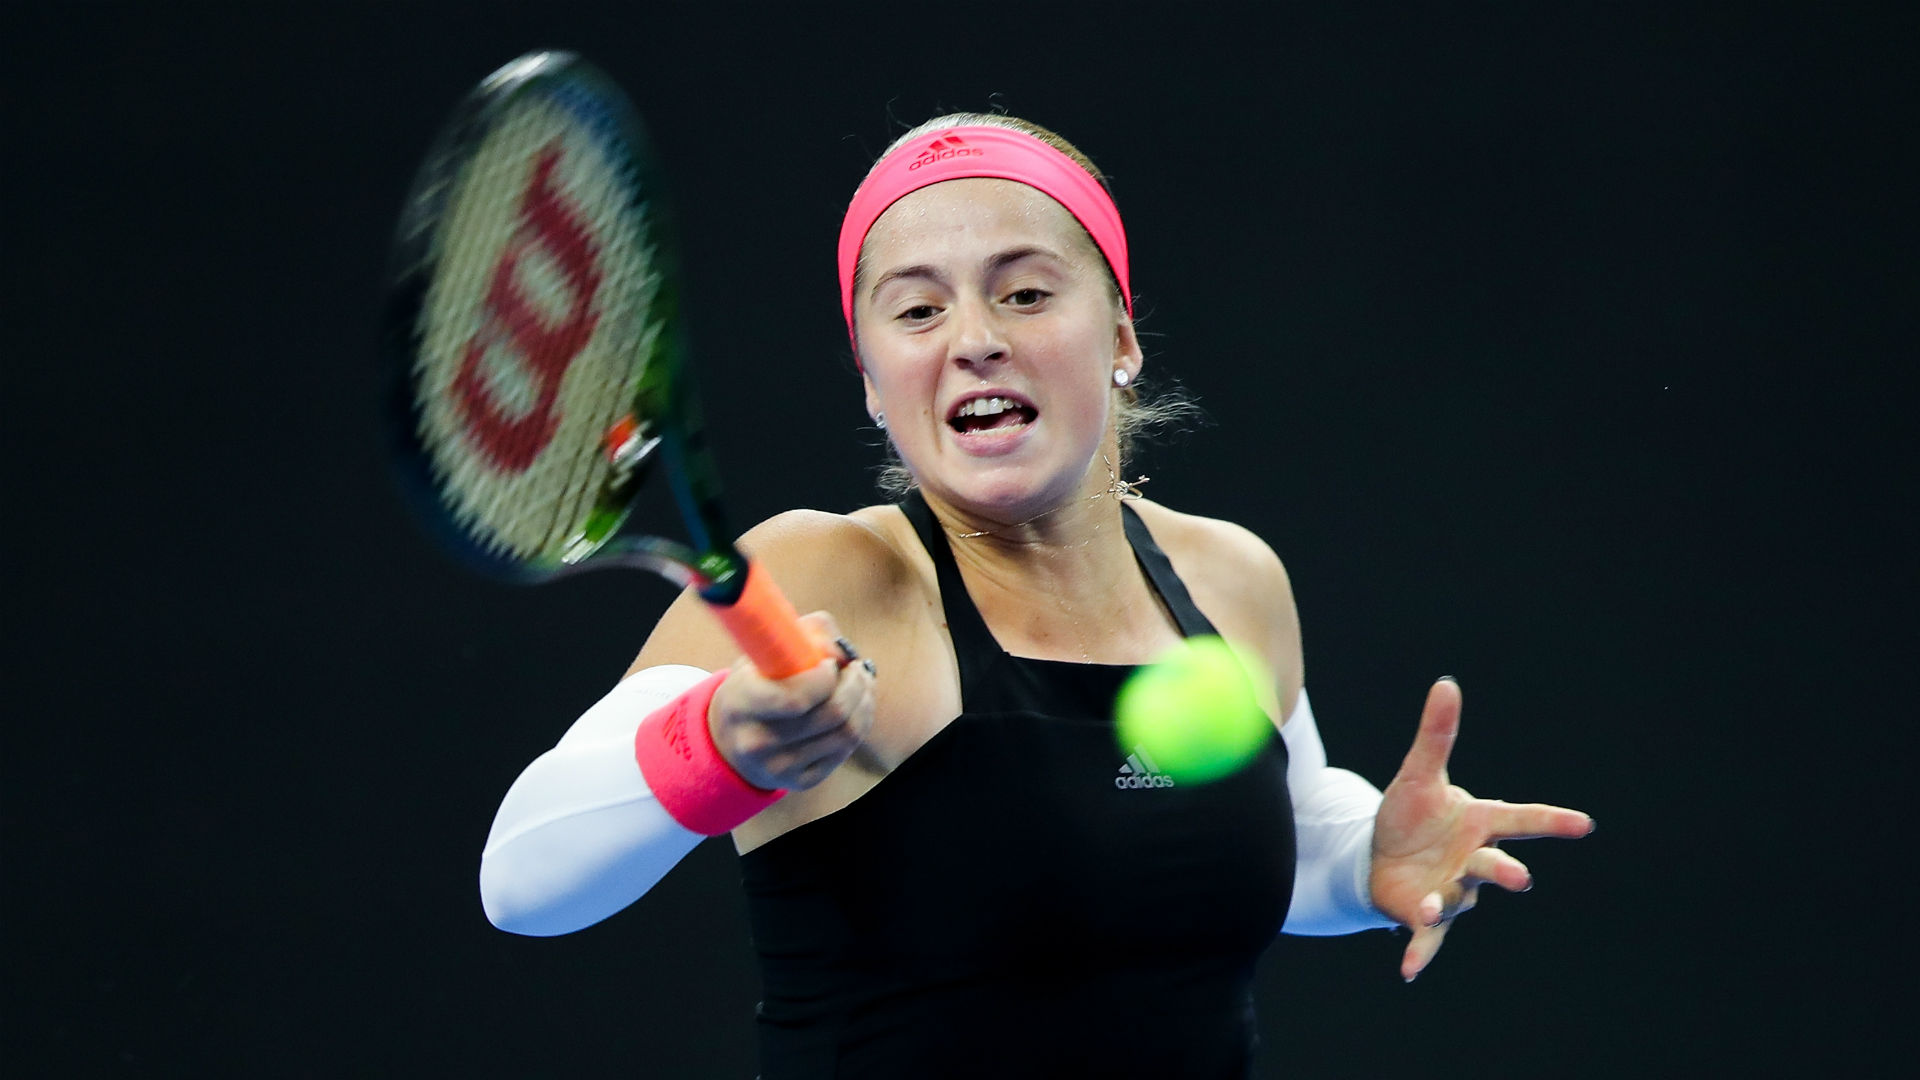 Kristina Kucova had not won a WTA main draw match in over a year but she came from a set down to beat Jelena Ostapenko.